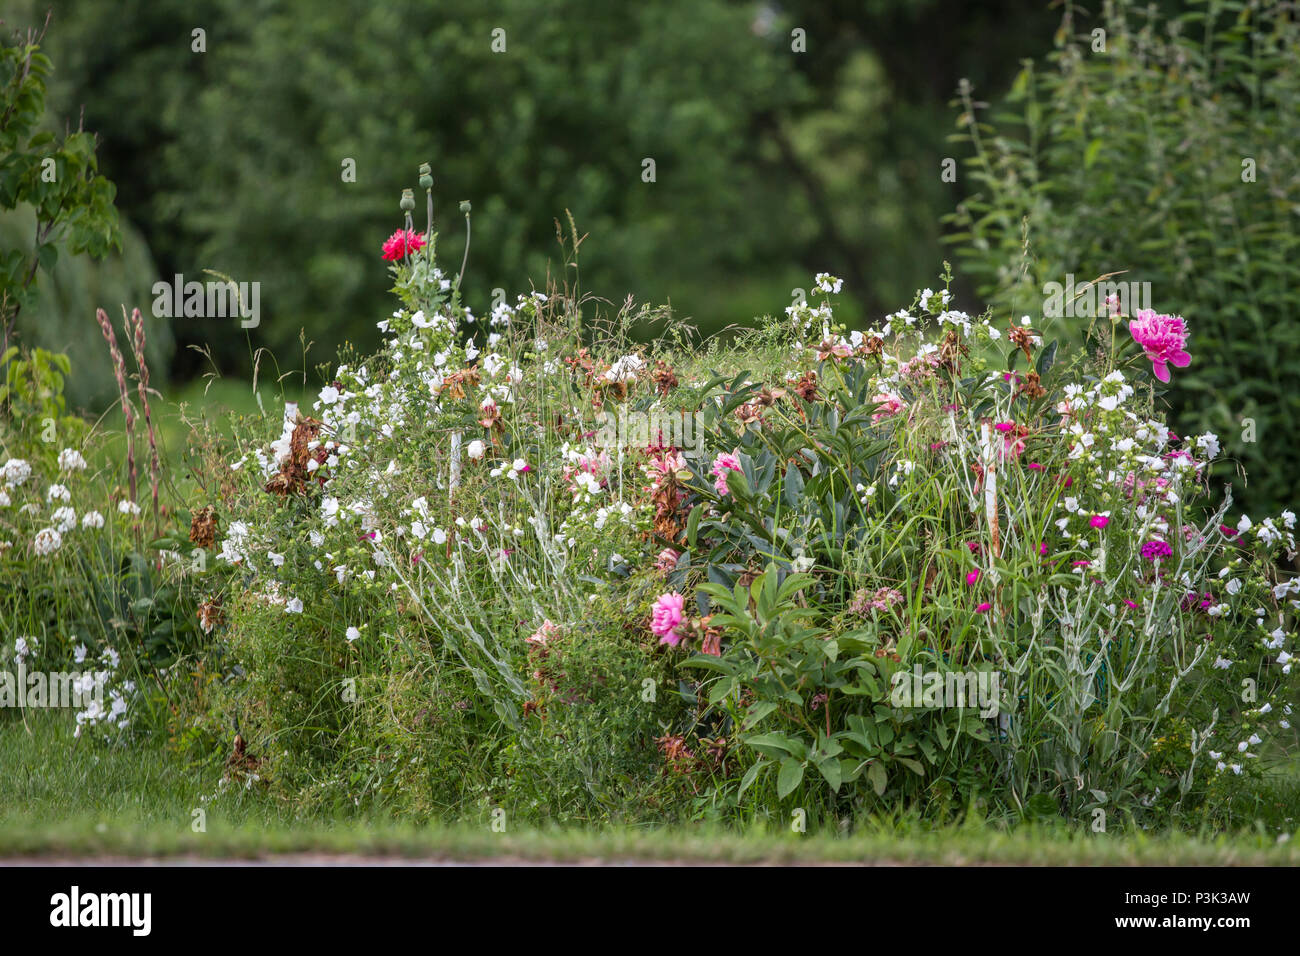 Flower garden in the countryside Stock Photo